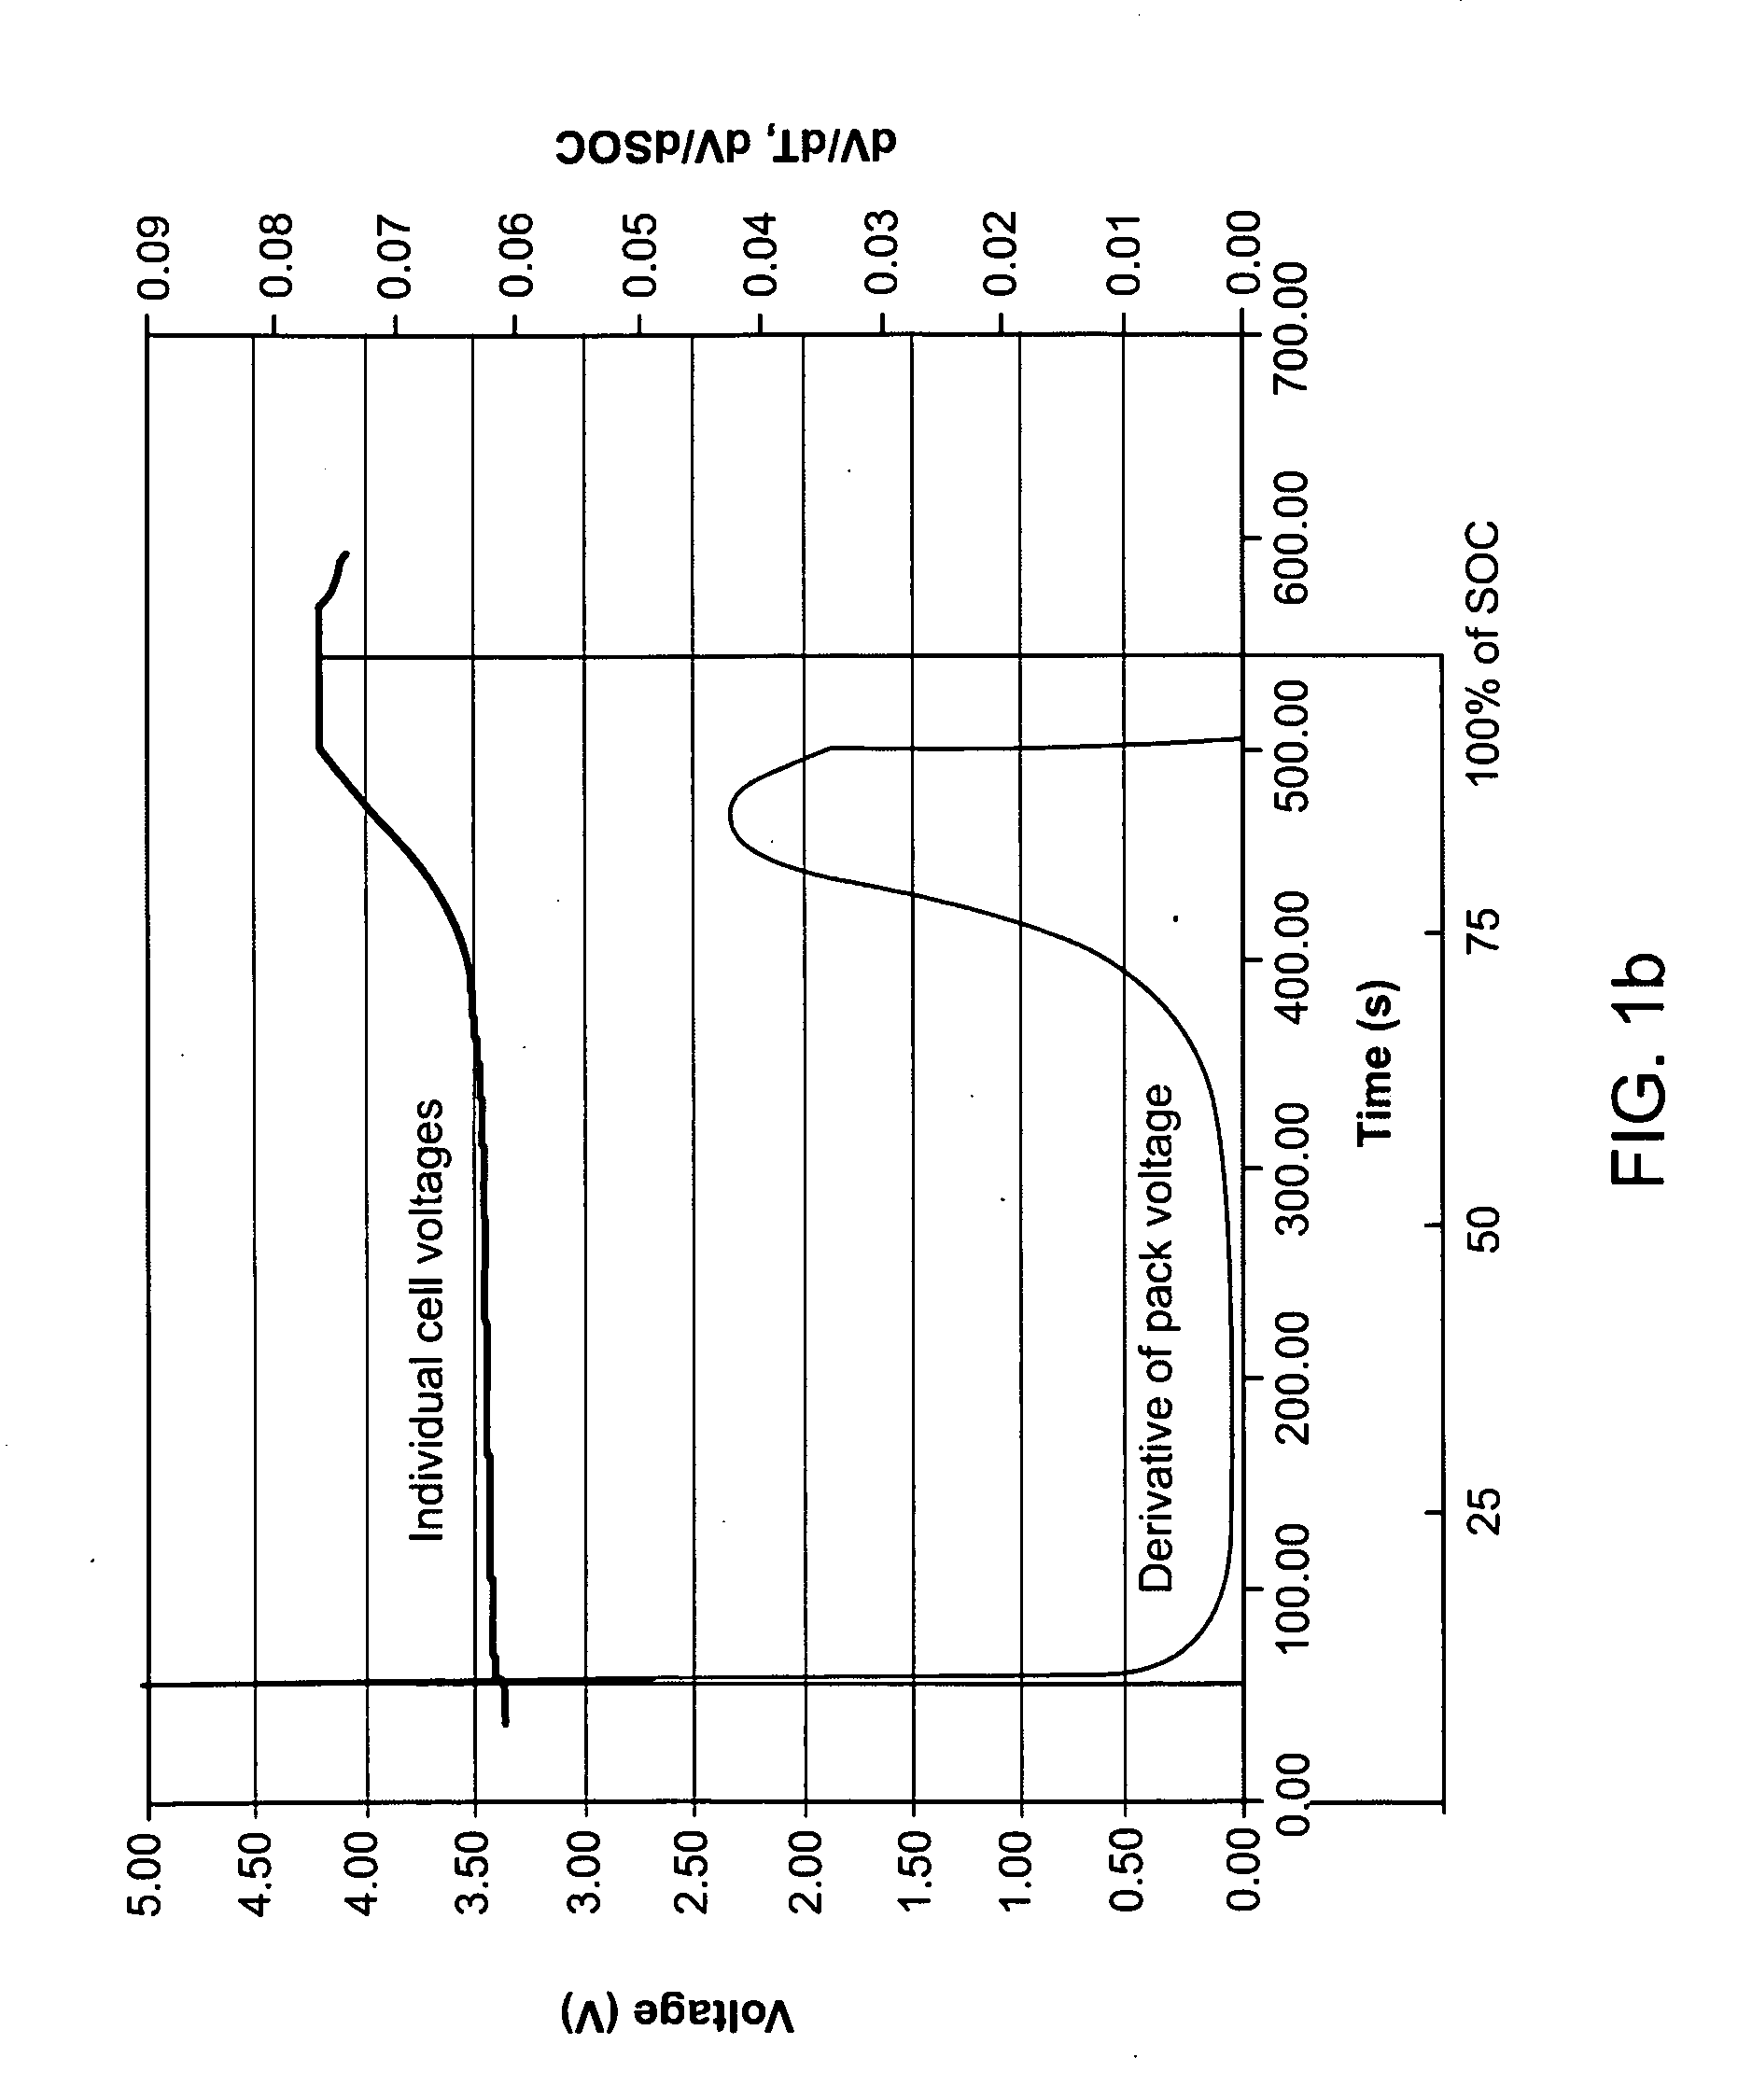 Method For Detecting Cell State-Of-Charge and State-Of-Discharge Divergence Of A Series String of Batteries Or Capacitors